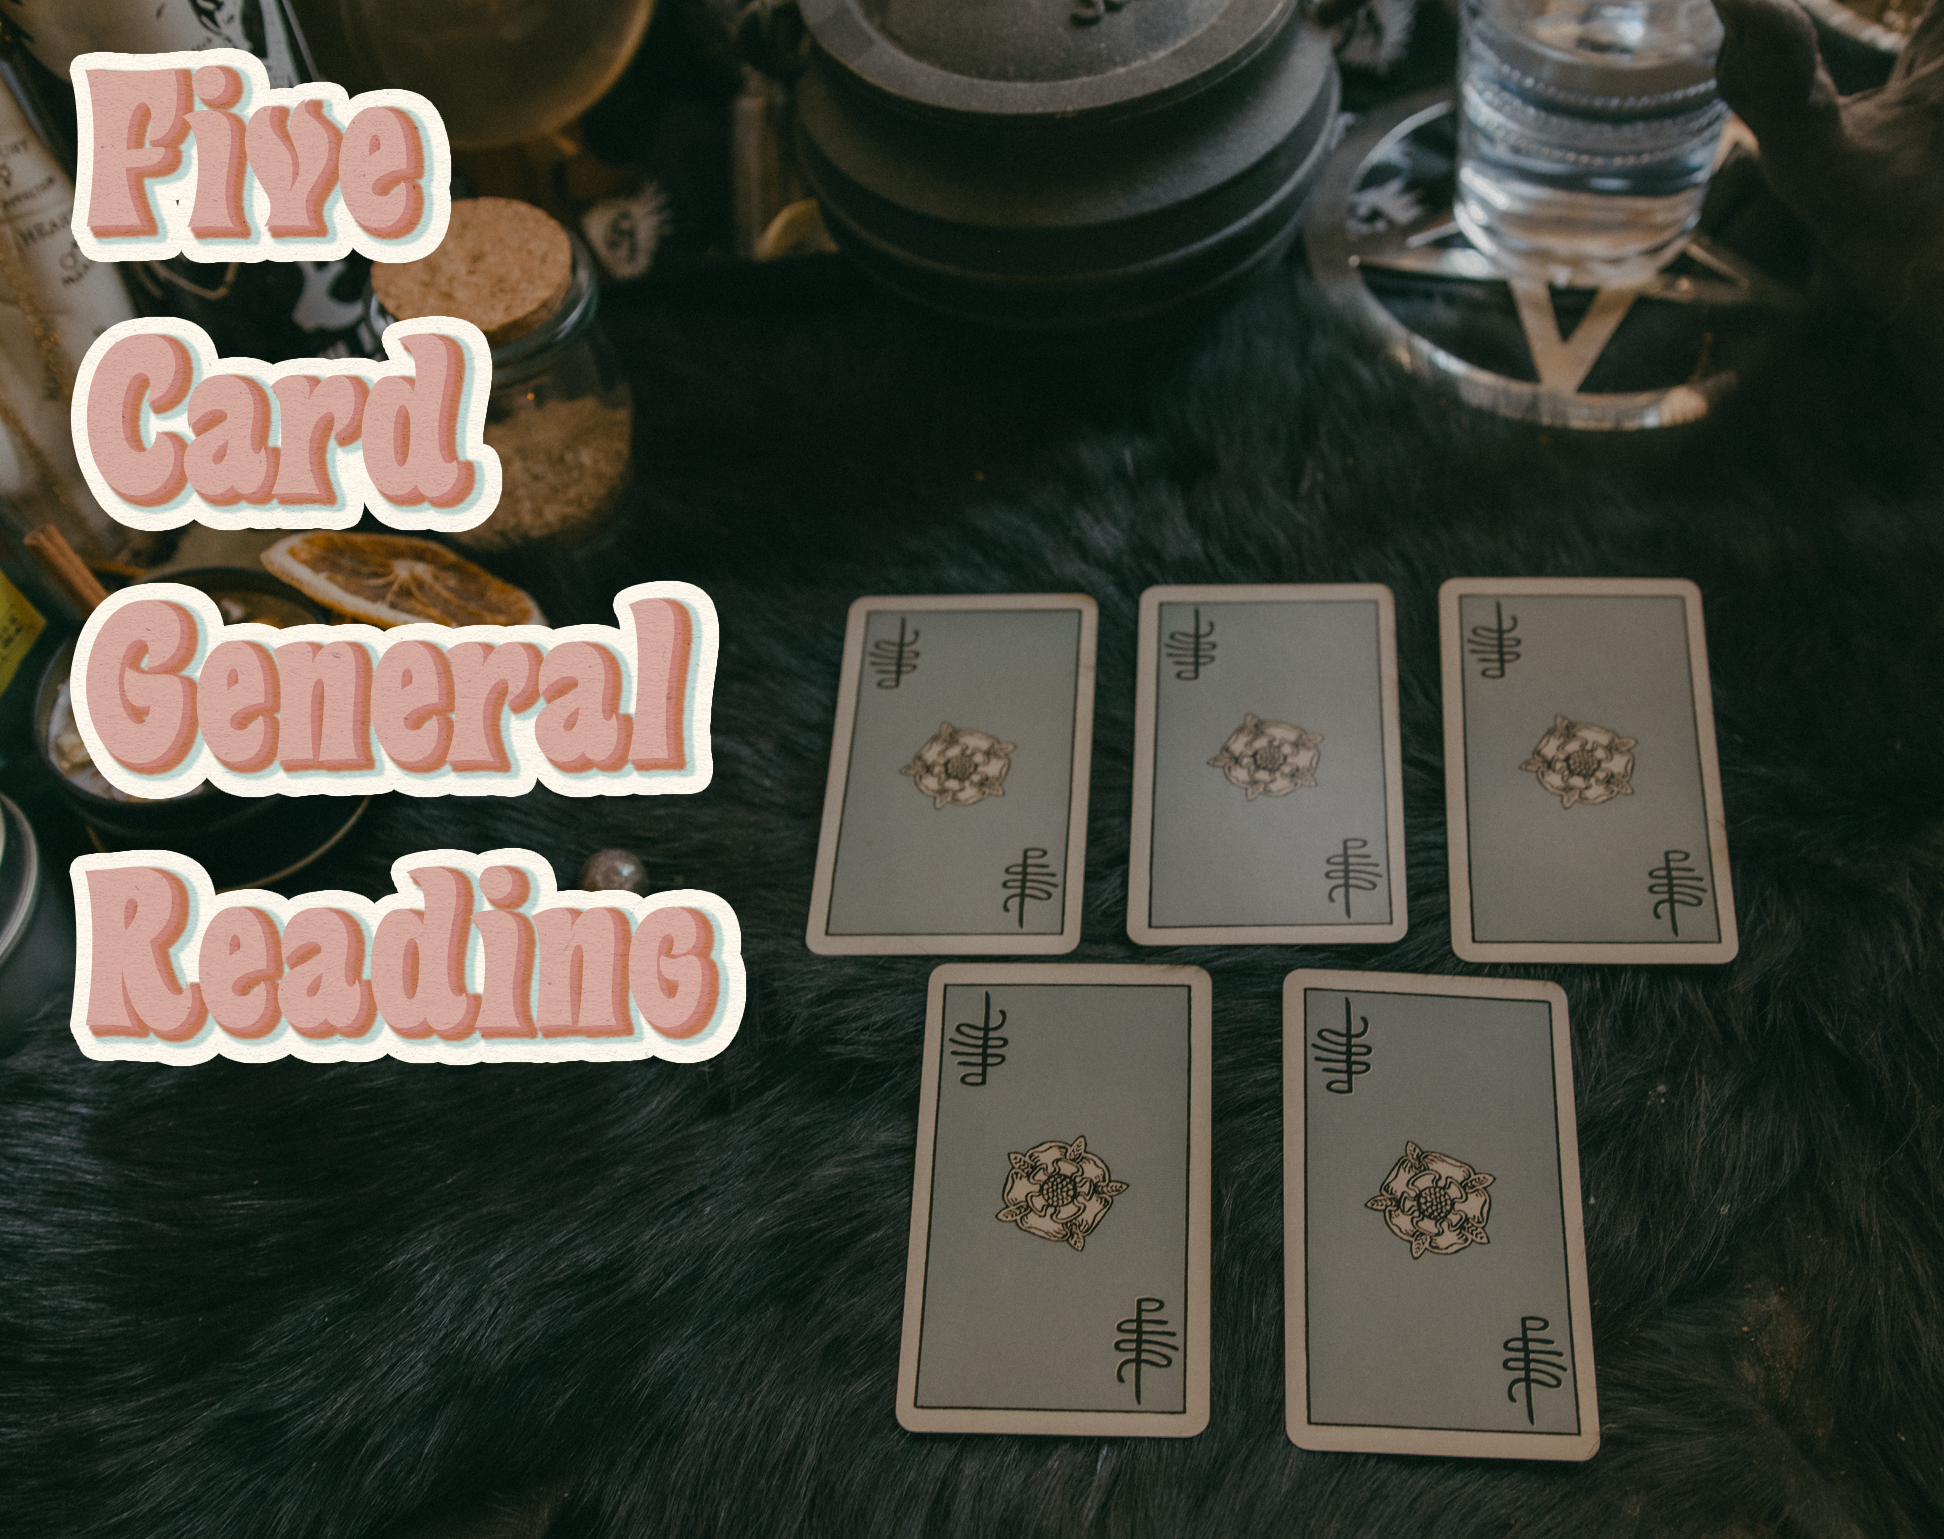 5 Card General Reading